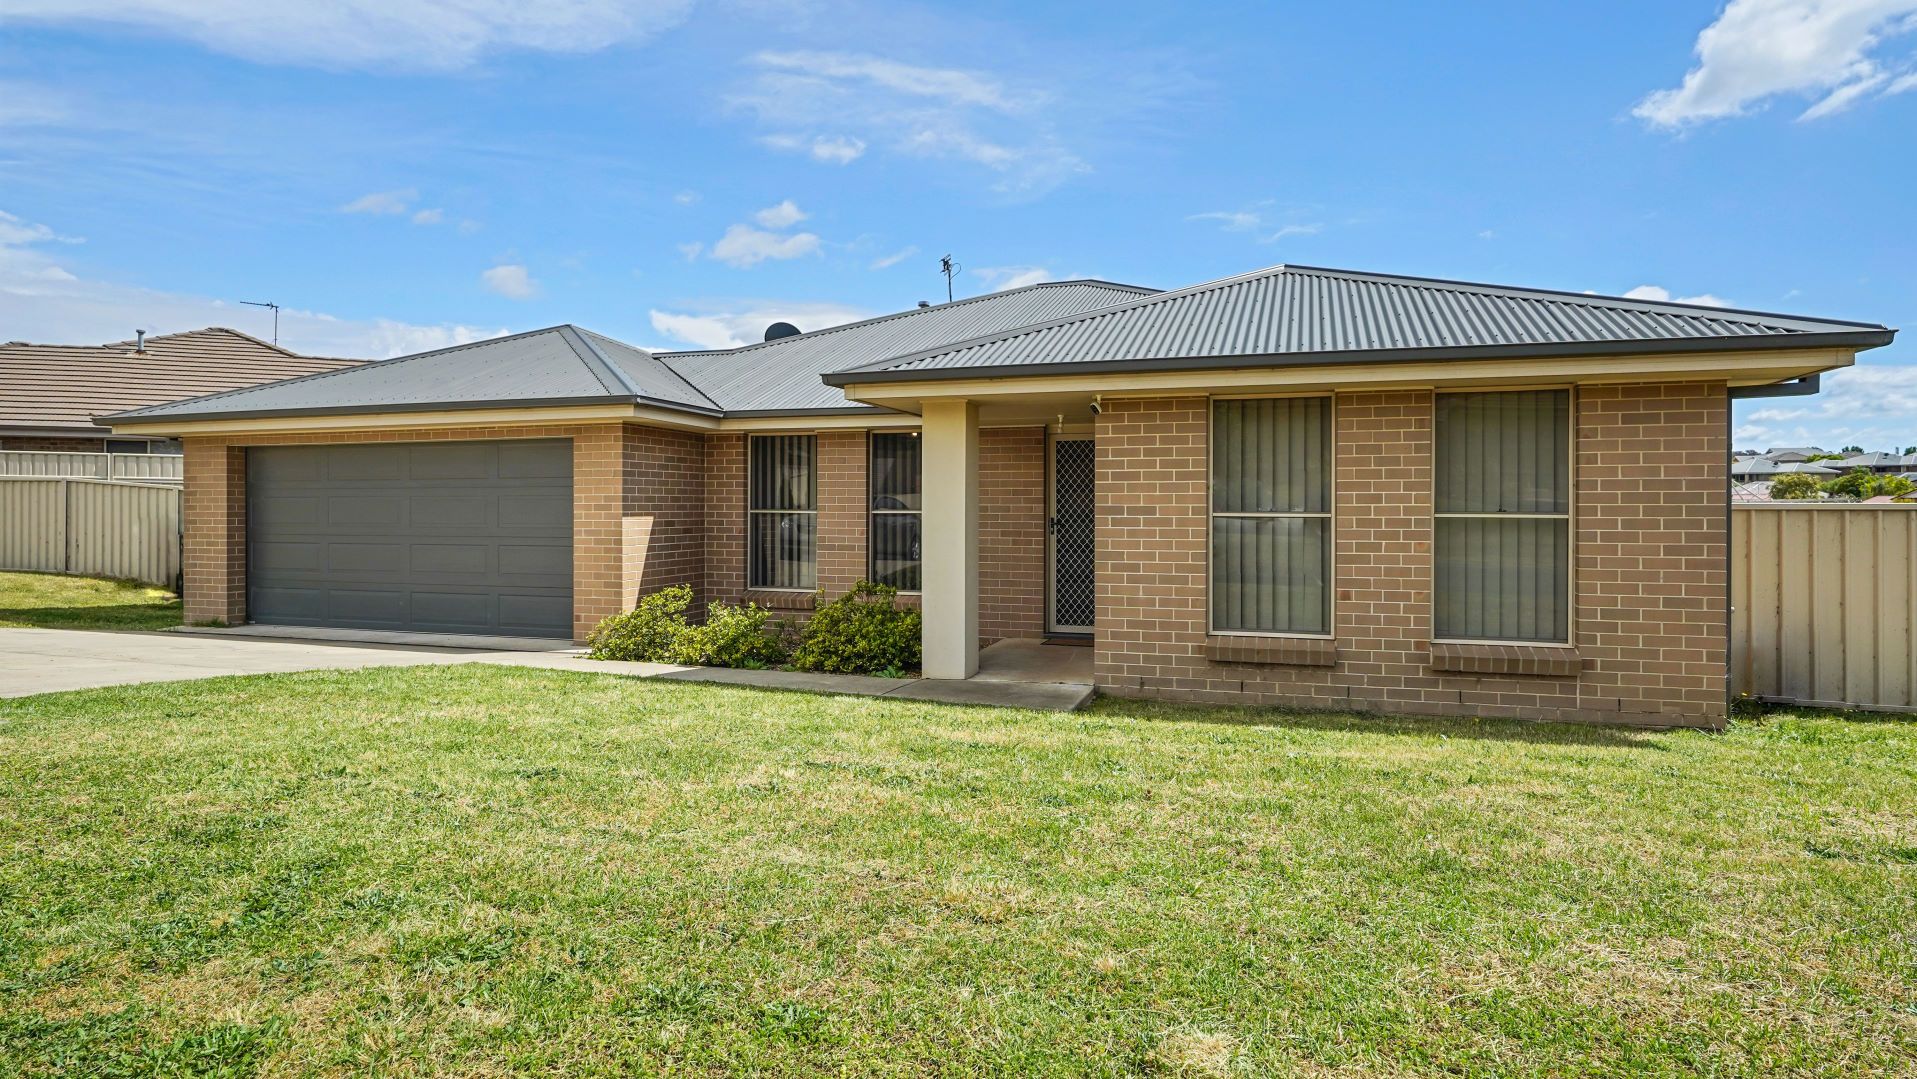 4 bedrooms House in 21 Robinson Court ORANGE NSW, 2800